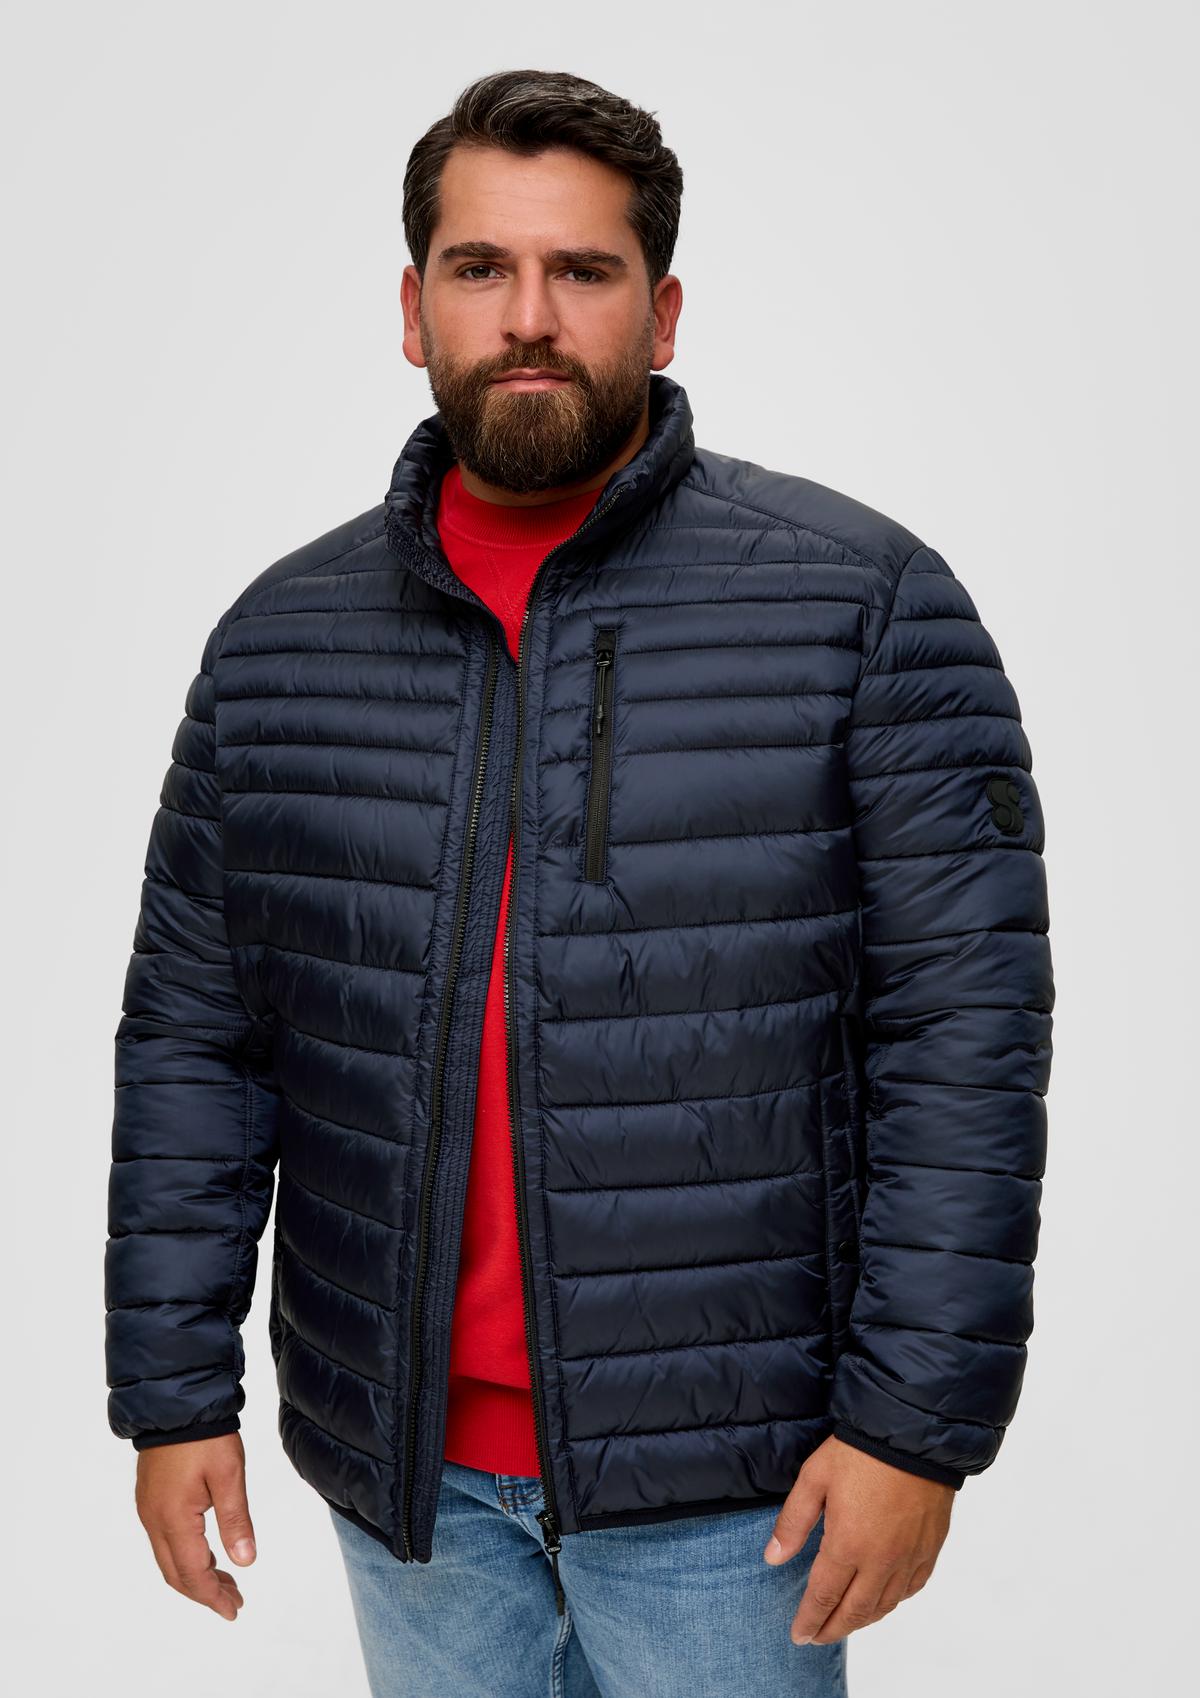 offwhite stand-up collar Quilted a with - jacket